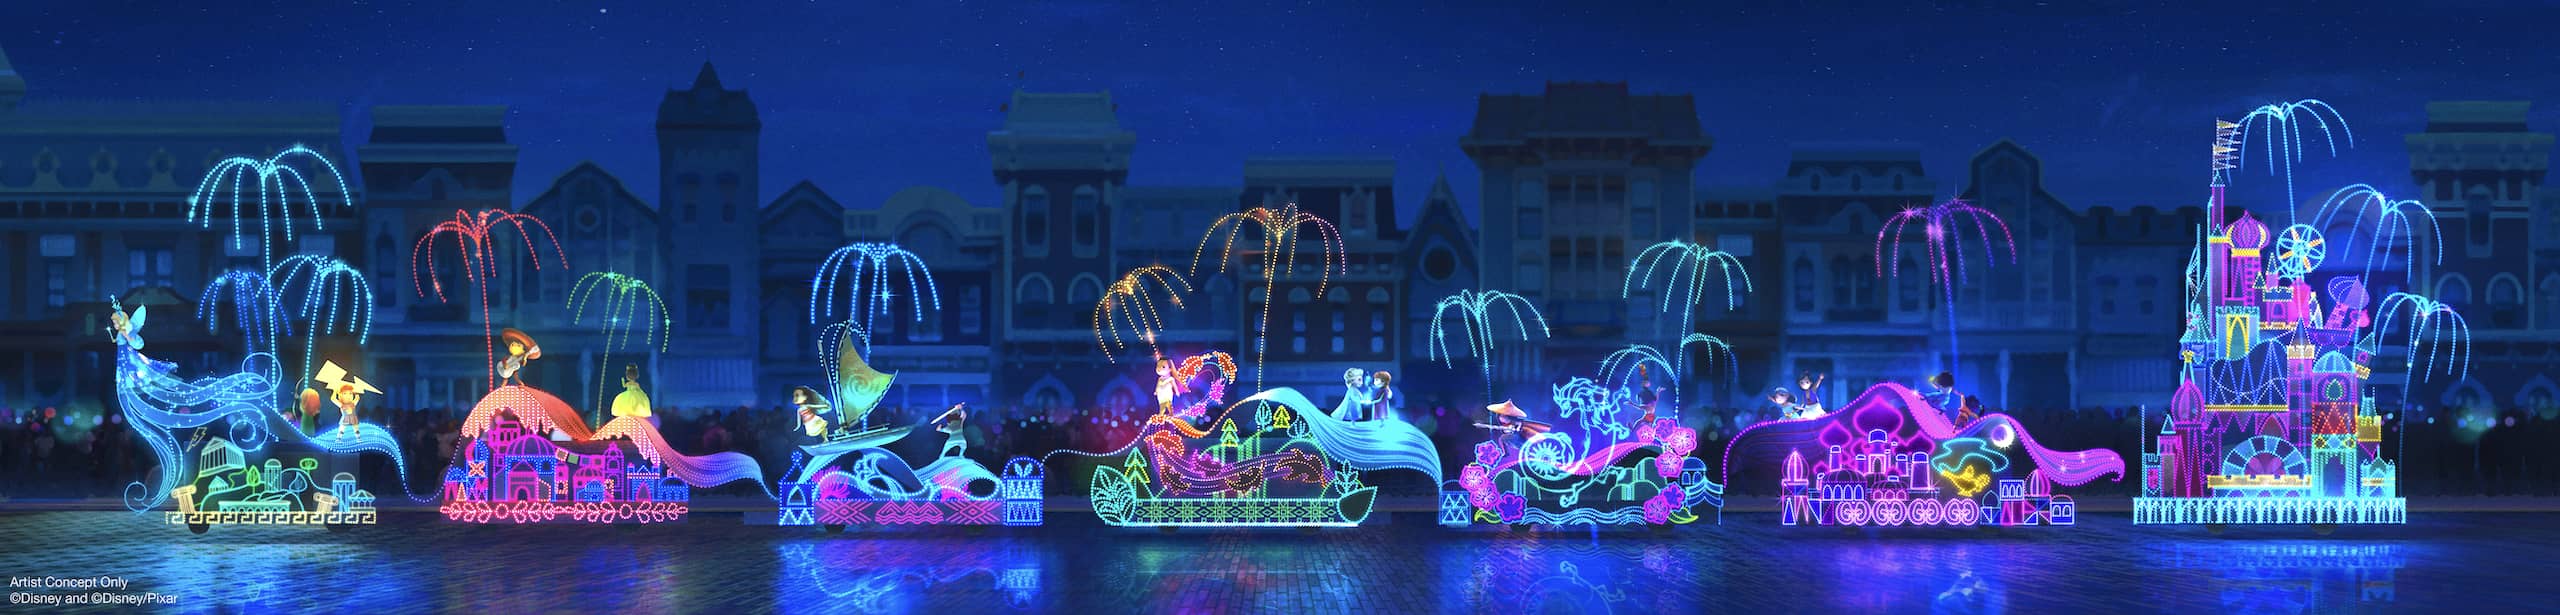 New Main Street Electrical Parade float